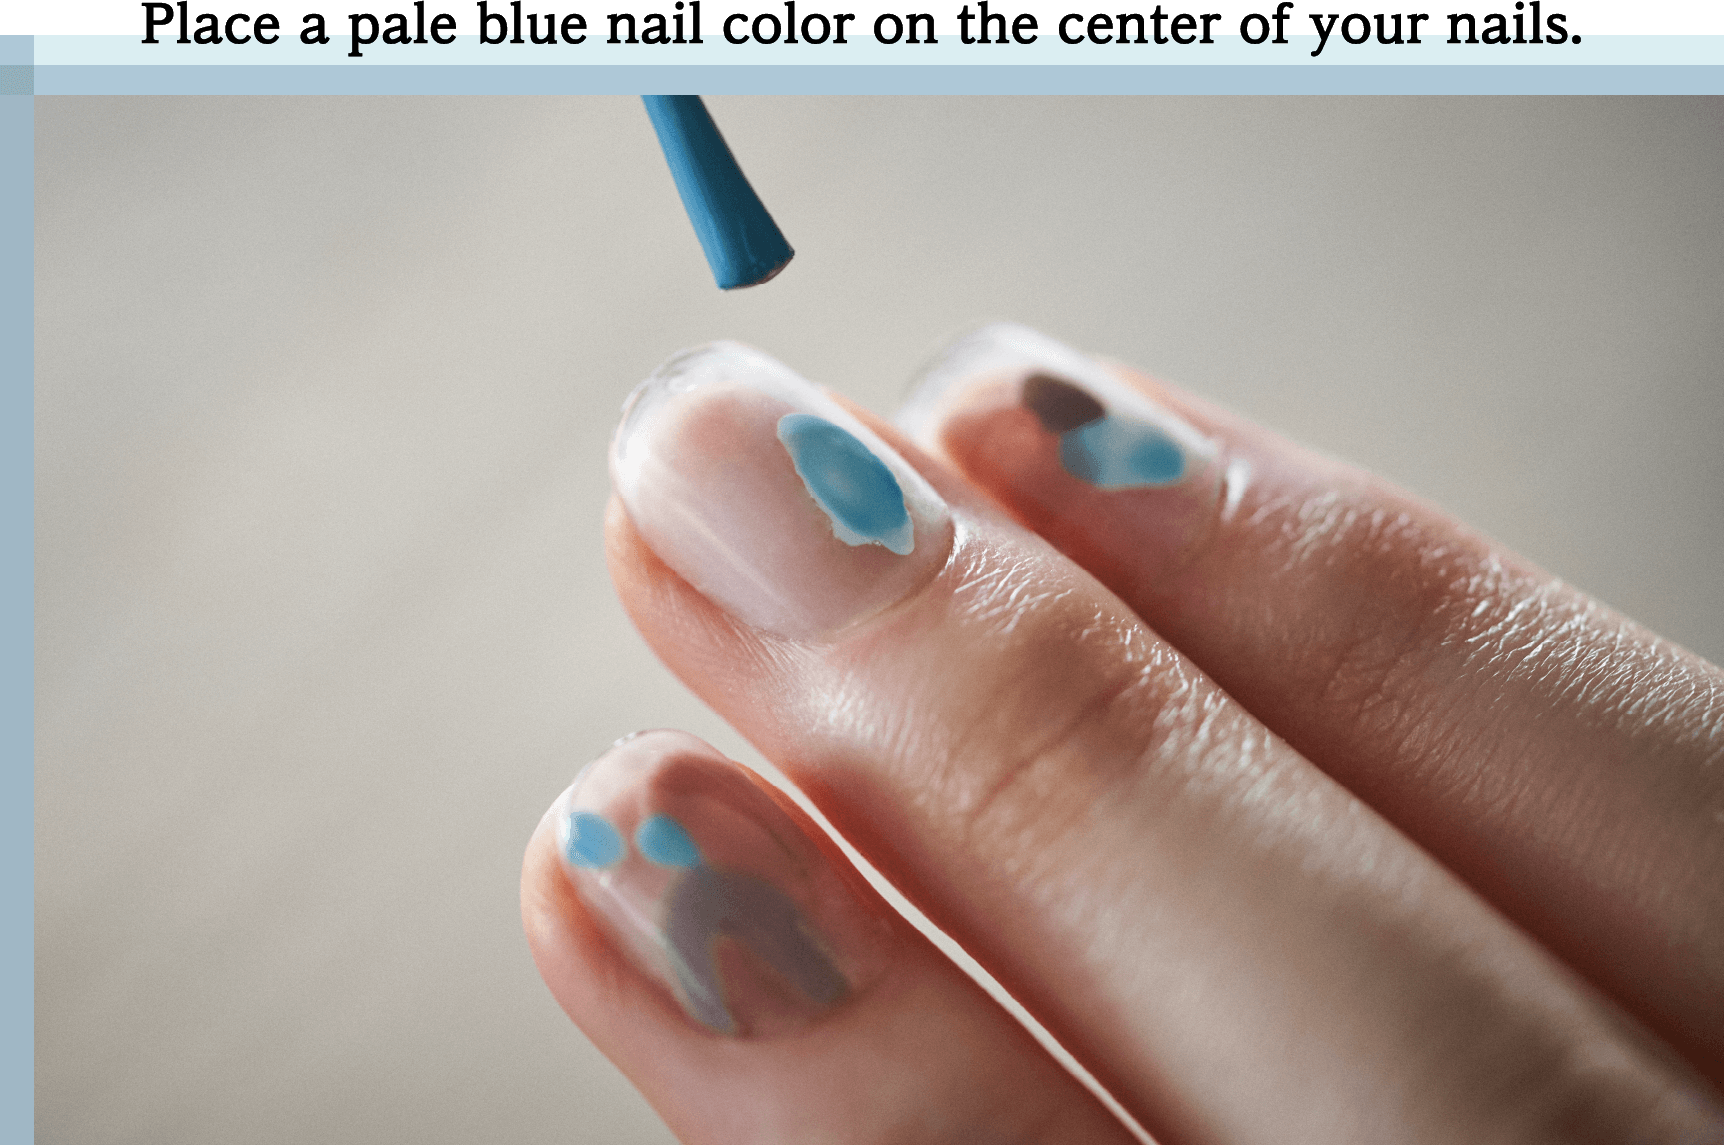 Place a pale blue nail color on the center of your nails.